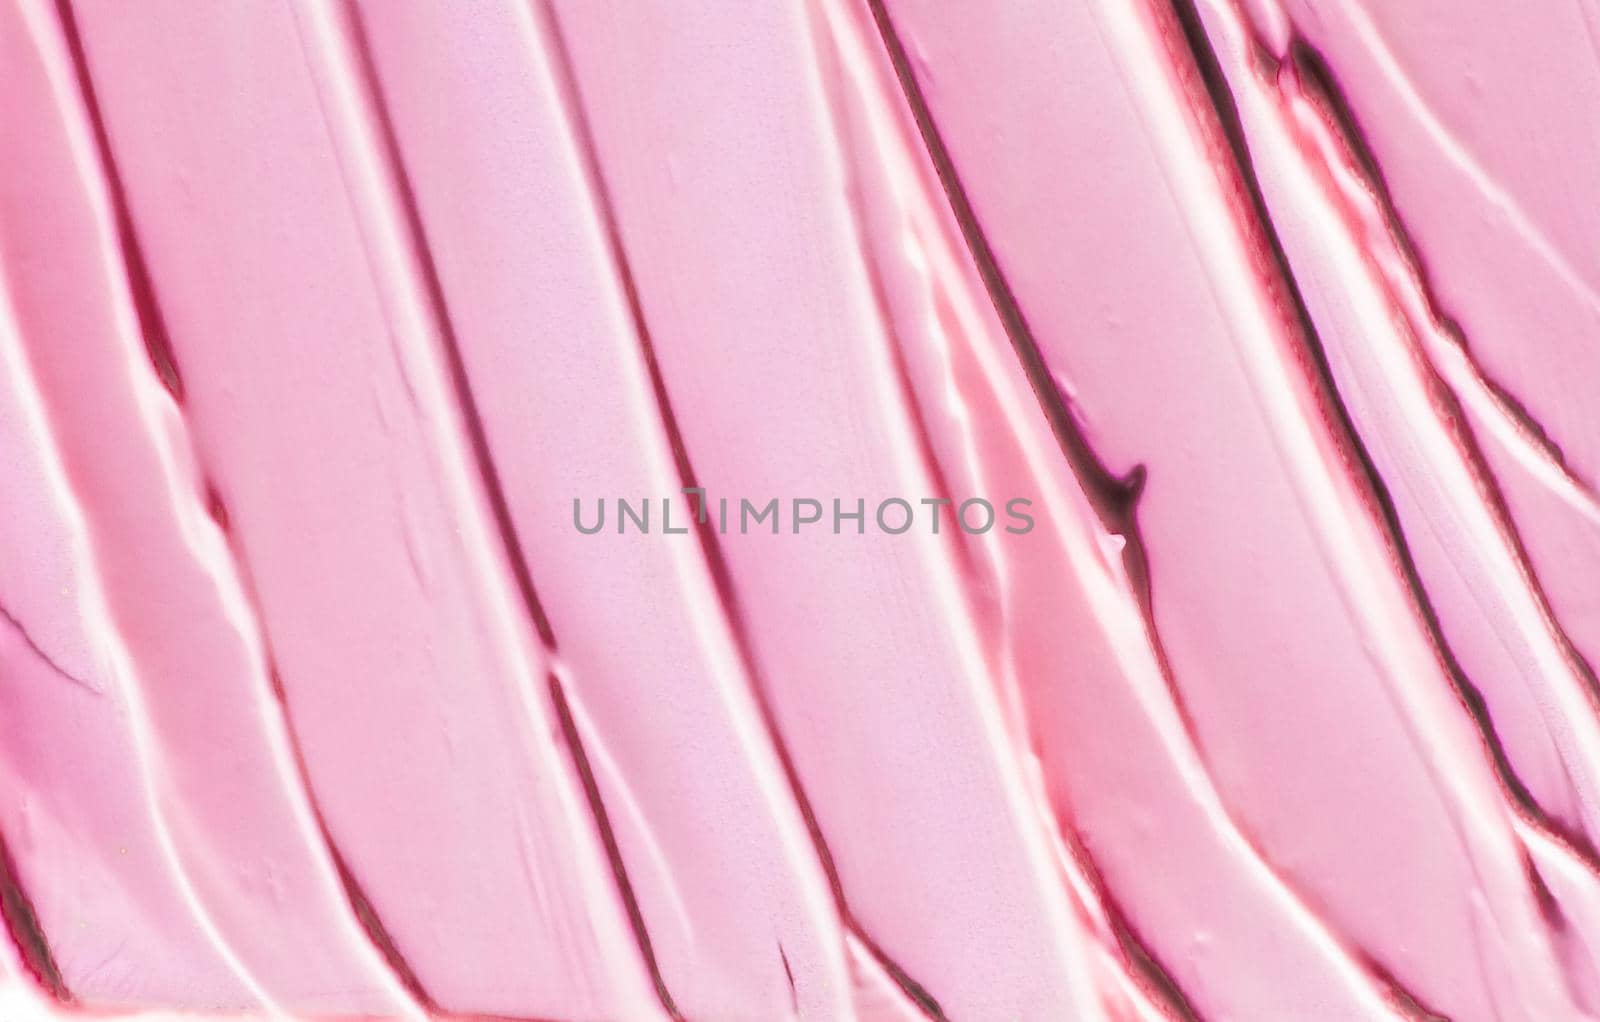 Pink cosmetic texture background, make-up and skincare cosmetics product, cream, lipstick, moisturizer macro as luxury beauty brand, holiday flatlay design by Anneleven